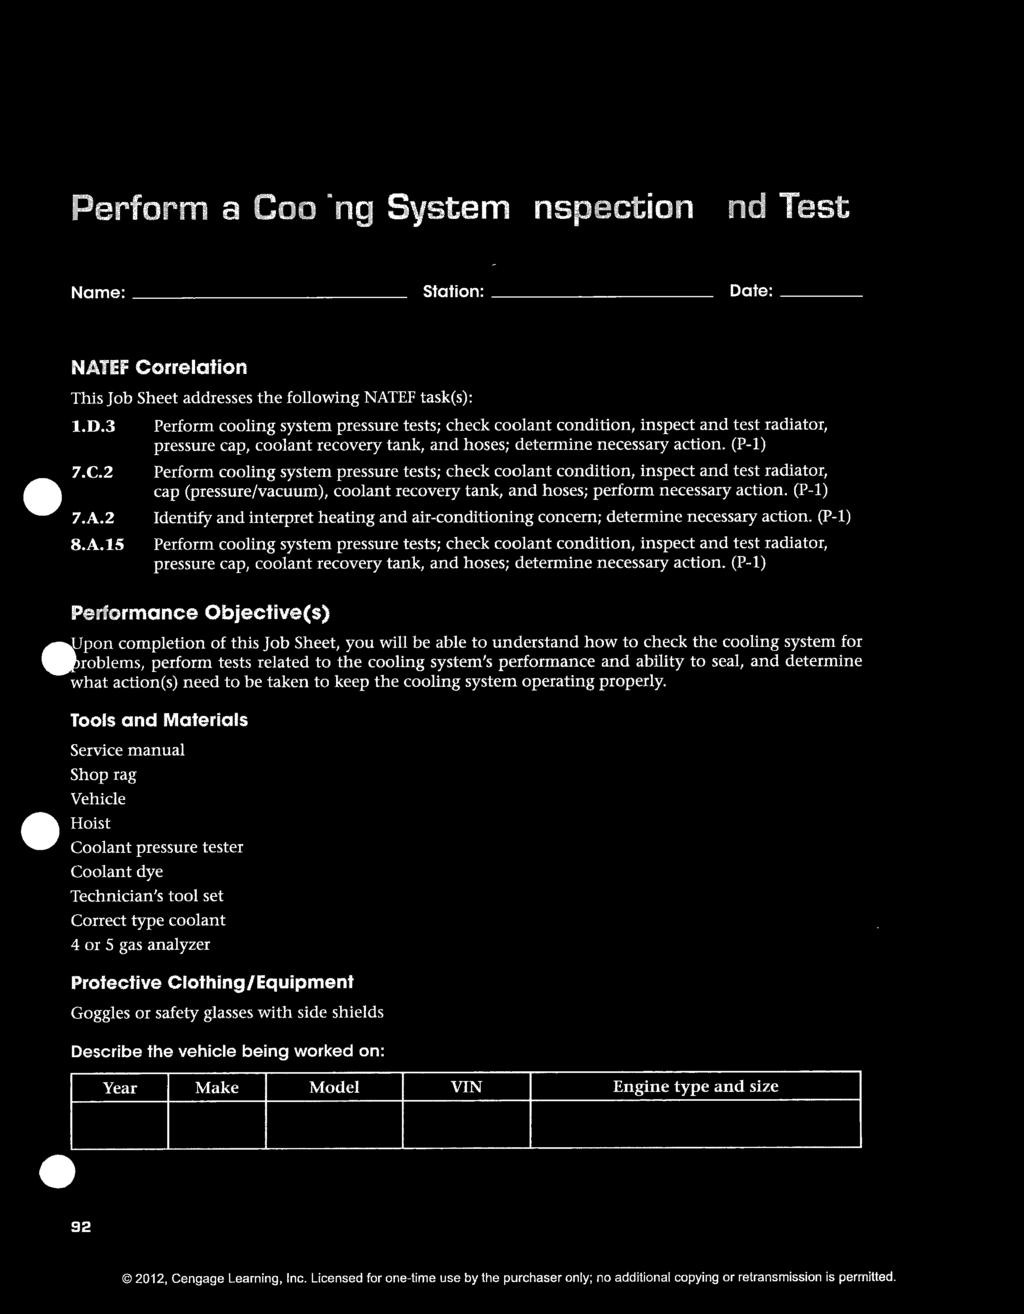 EF task(s): 7.C.2 7.A.2 8.A.l5 Perform cooling system pressure tests; check coolant condition, inspect and test radiator, pressure cap, coolant recovery tank, and hoses; determine necessary action.